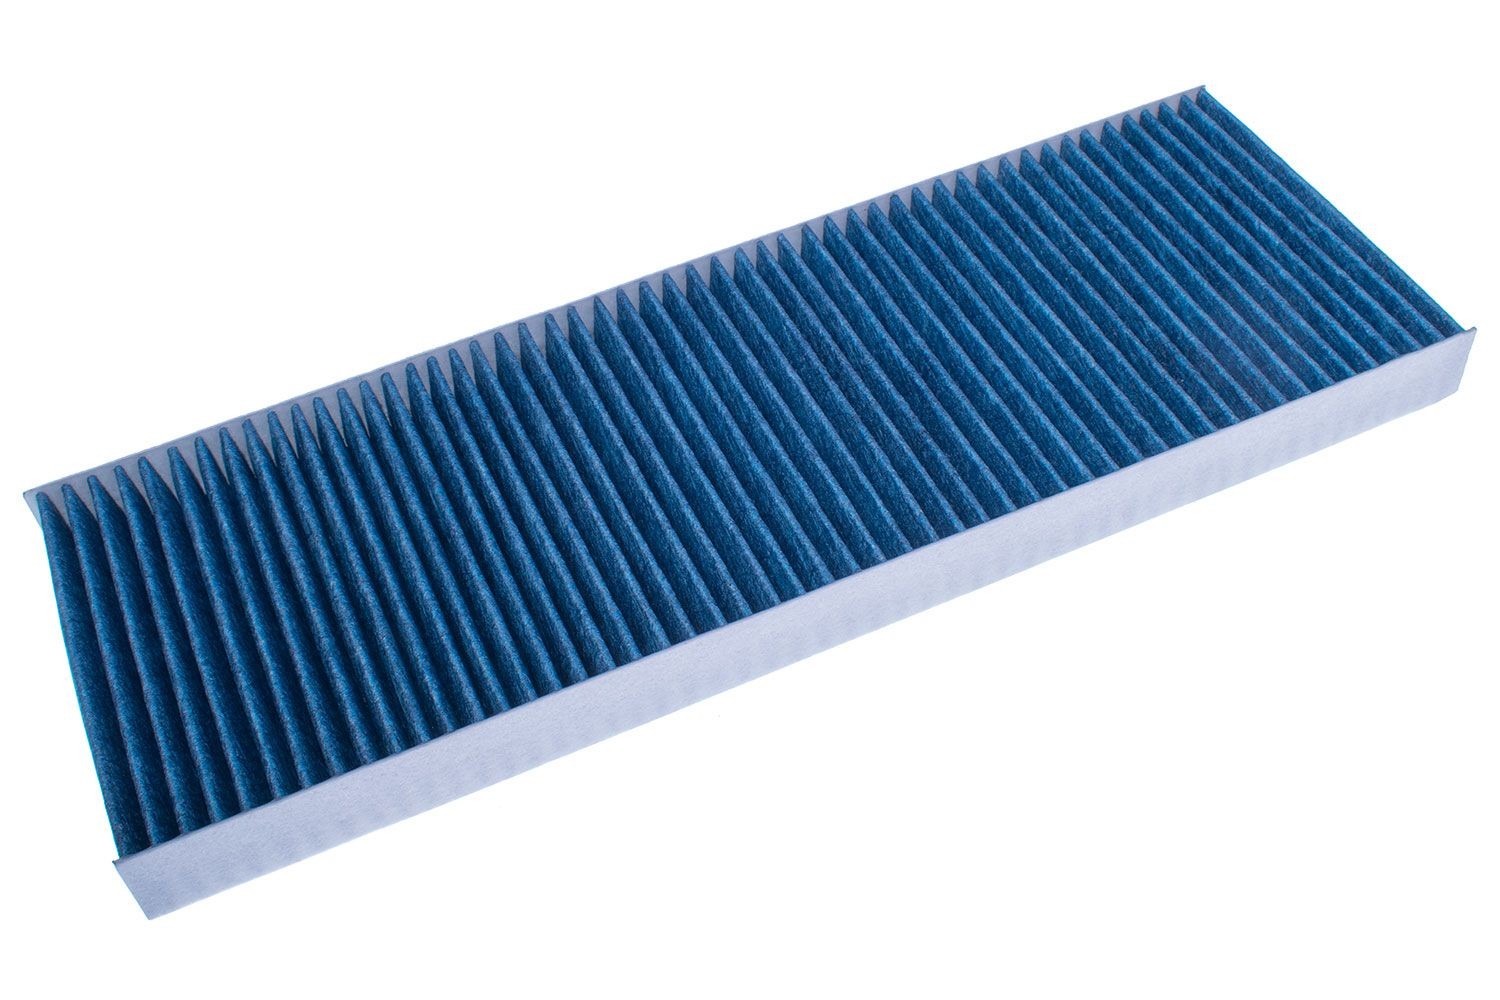 DENCKERMANN Activated Carbon Filter, with antibacterial action, 448 mm x 153 mm x 30 mm Width: 153mm, Height: 30mm, Length: 448mm Cabin filter M119026A buy